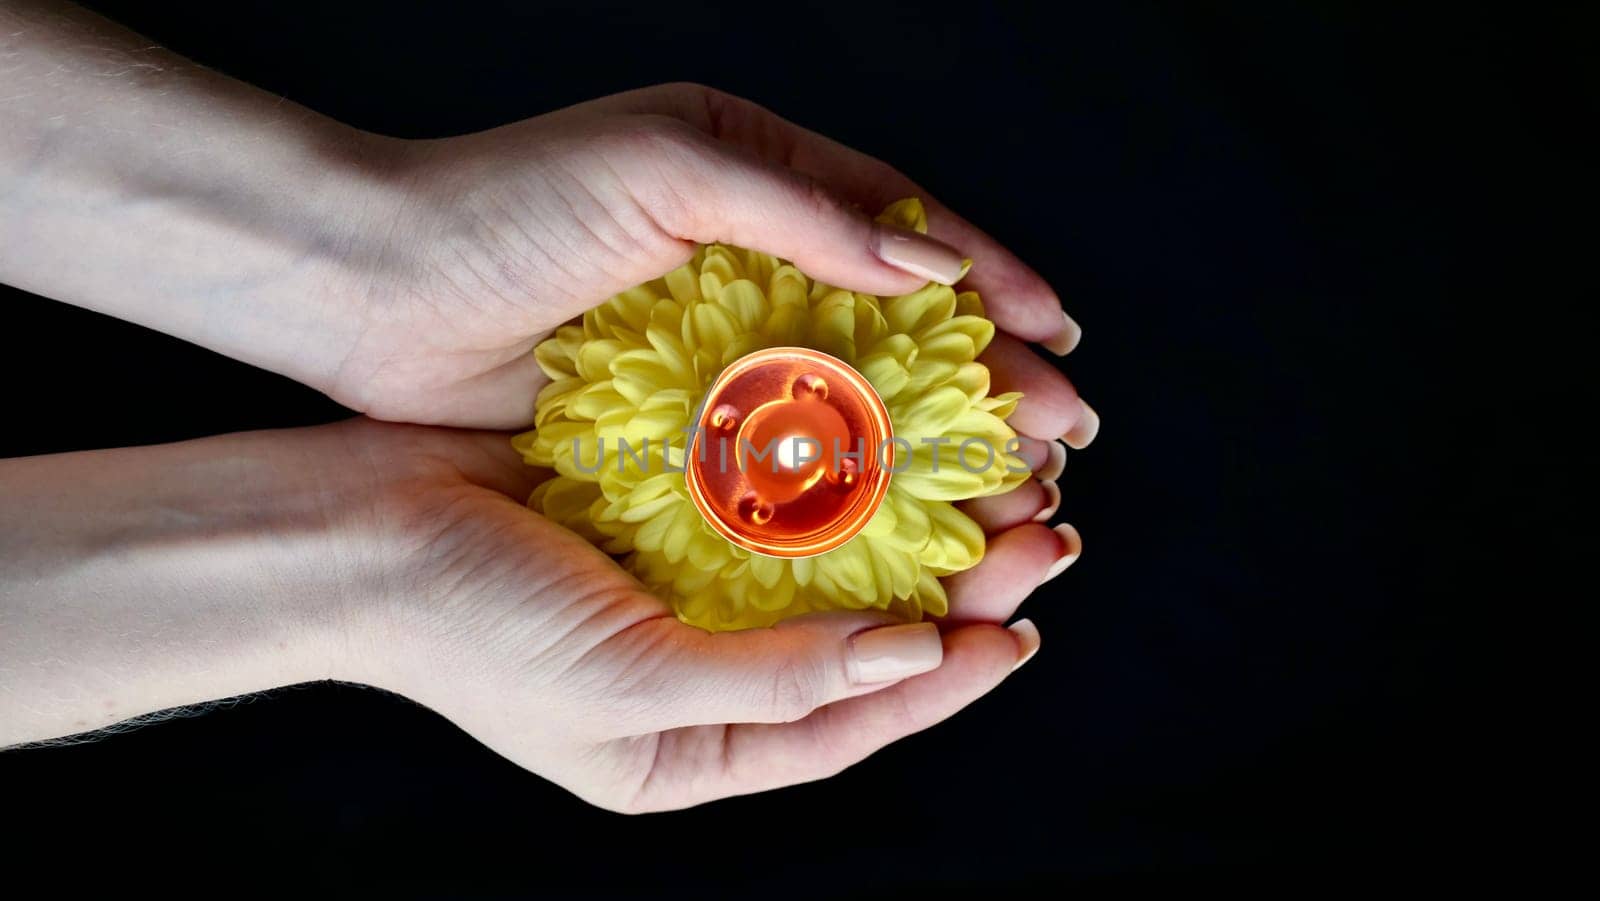 Celebration of the religious Indian festival of Diwali. Yellow flowers in woman's hands with burning holi candles at Hindi festival close-up, isolated, black background